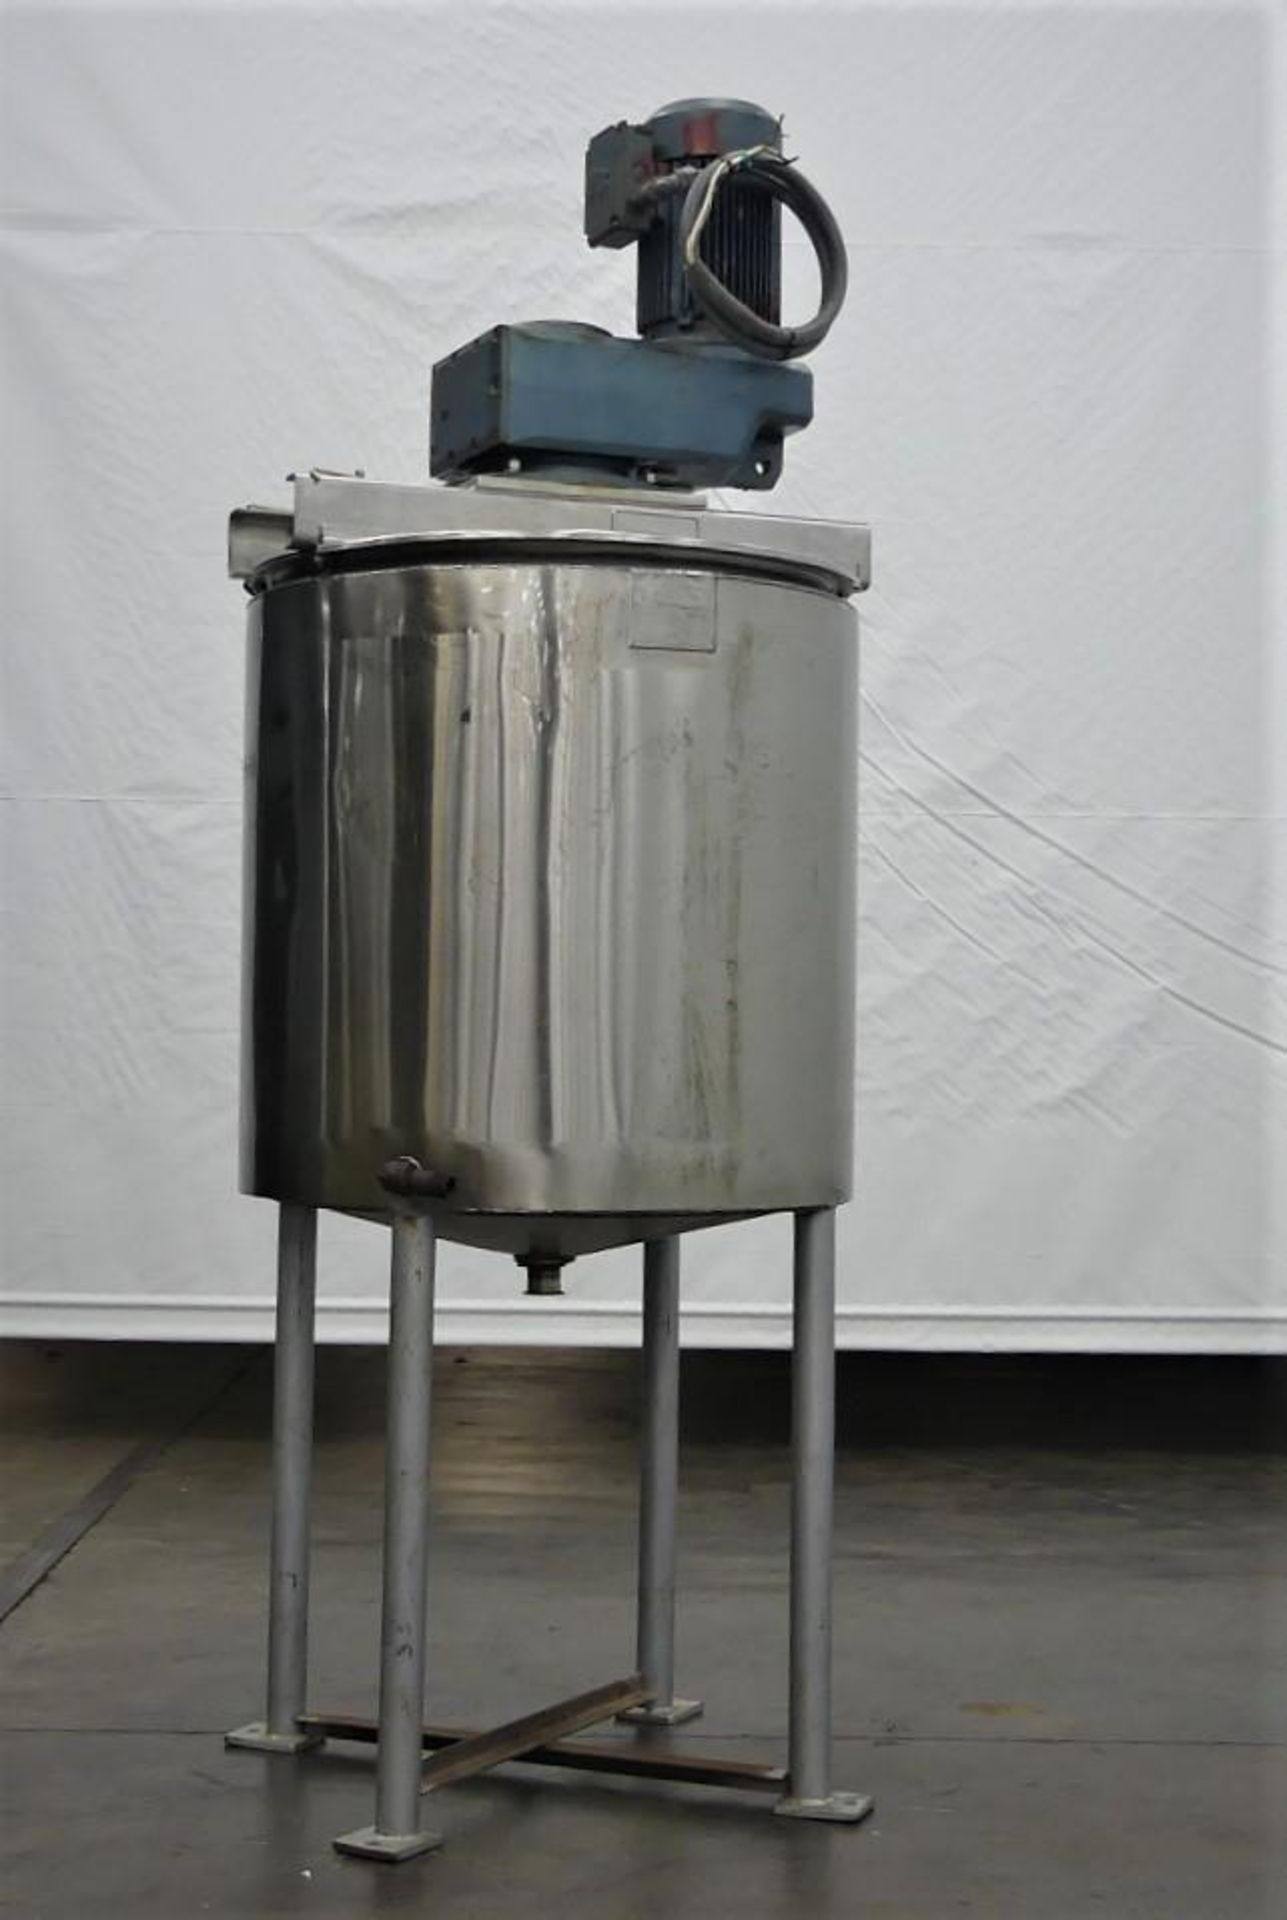 B&G Machine Company 100 Gallon Stainless Steel Jacketed Mixing Tank - Image 3 of 12